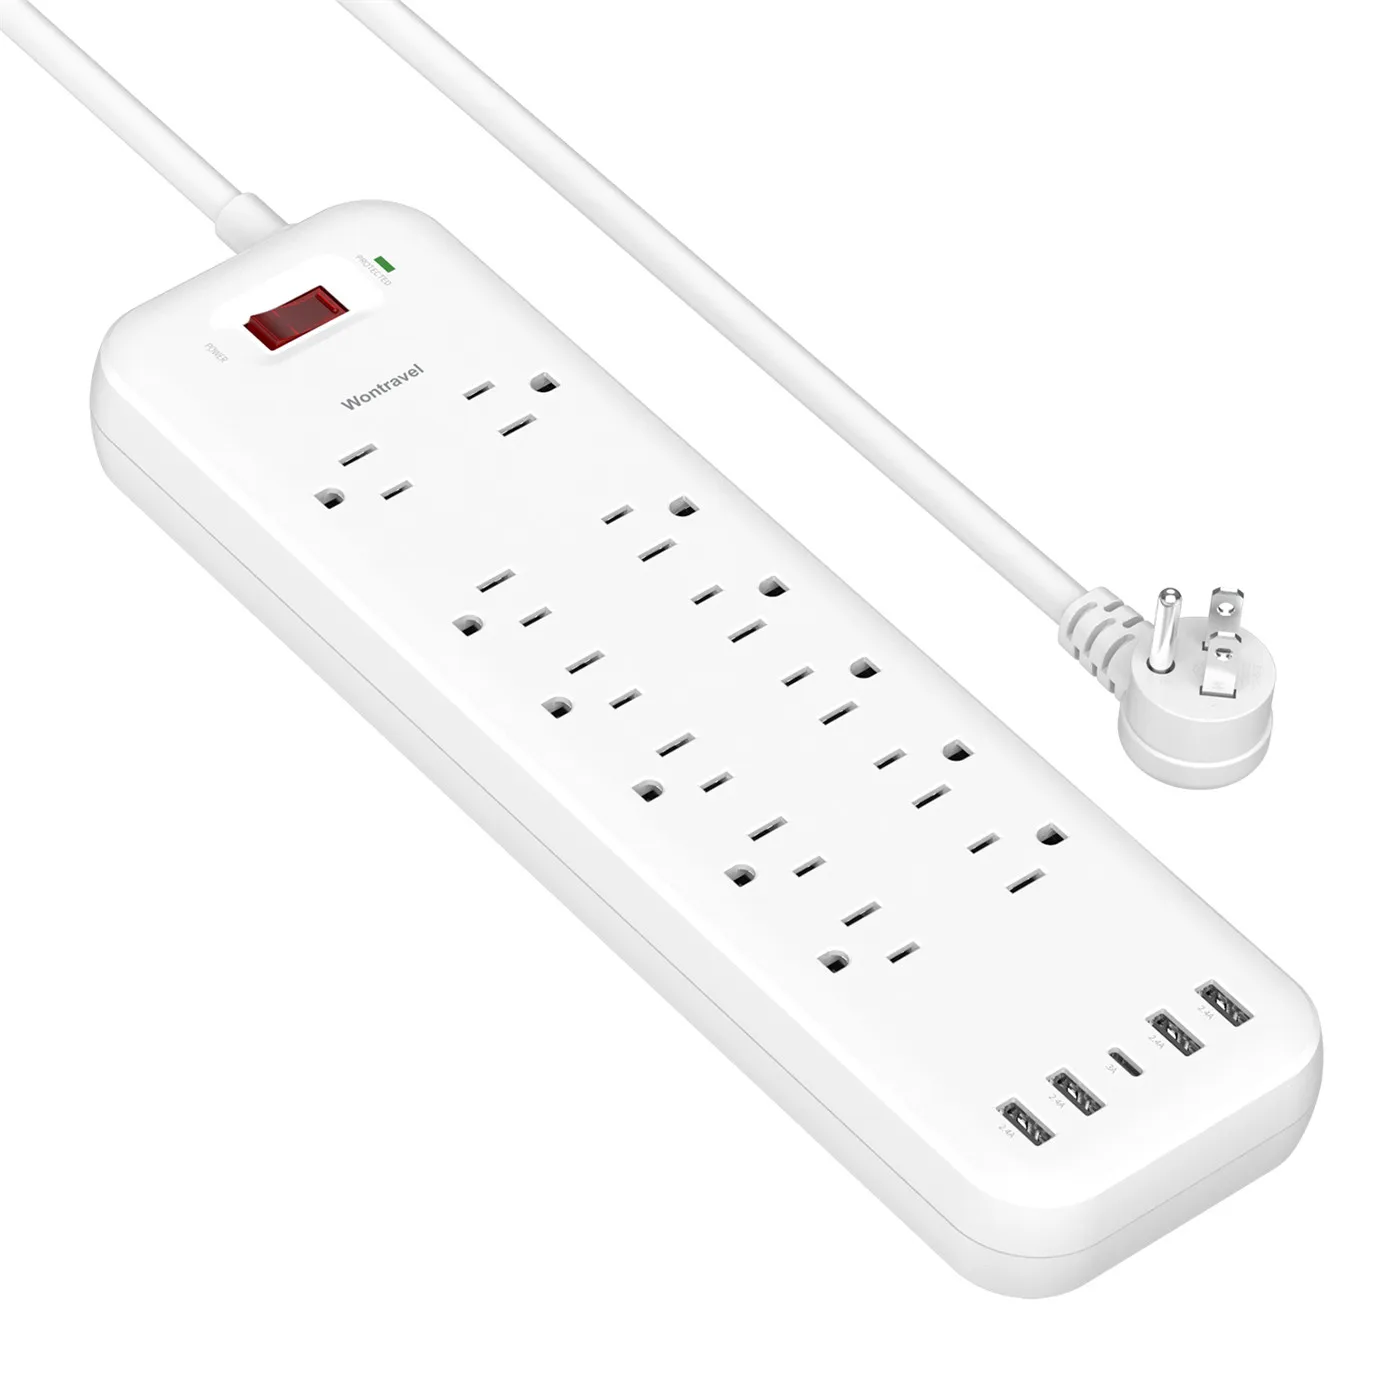 New Trend Universal USB C Smart Charger Extension Wall Socket Way Outlet US Plug Surge Protector Power Strip